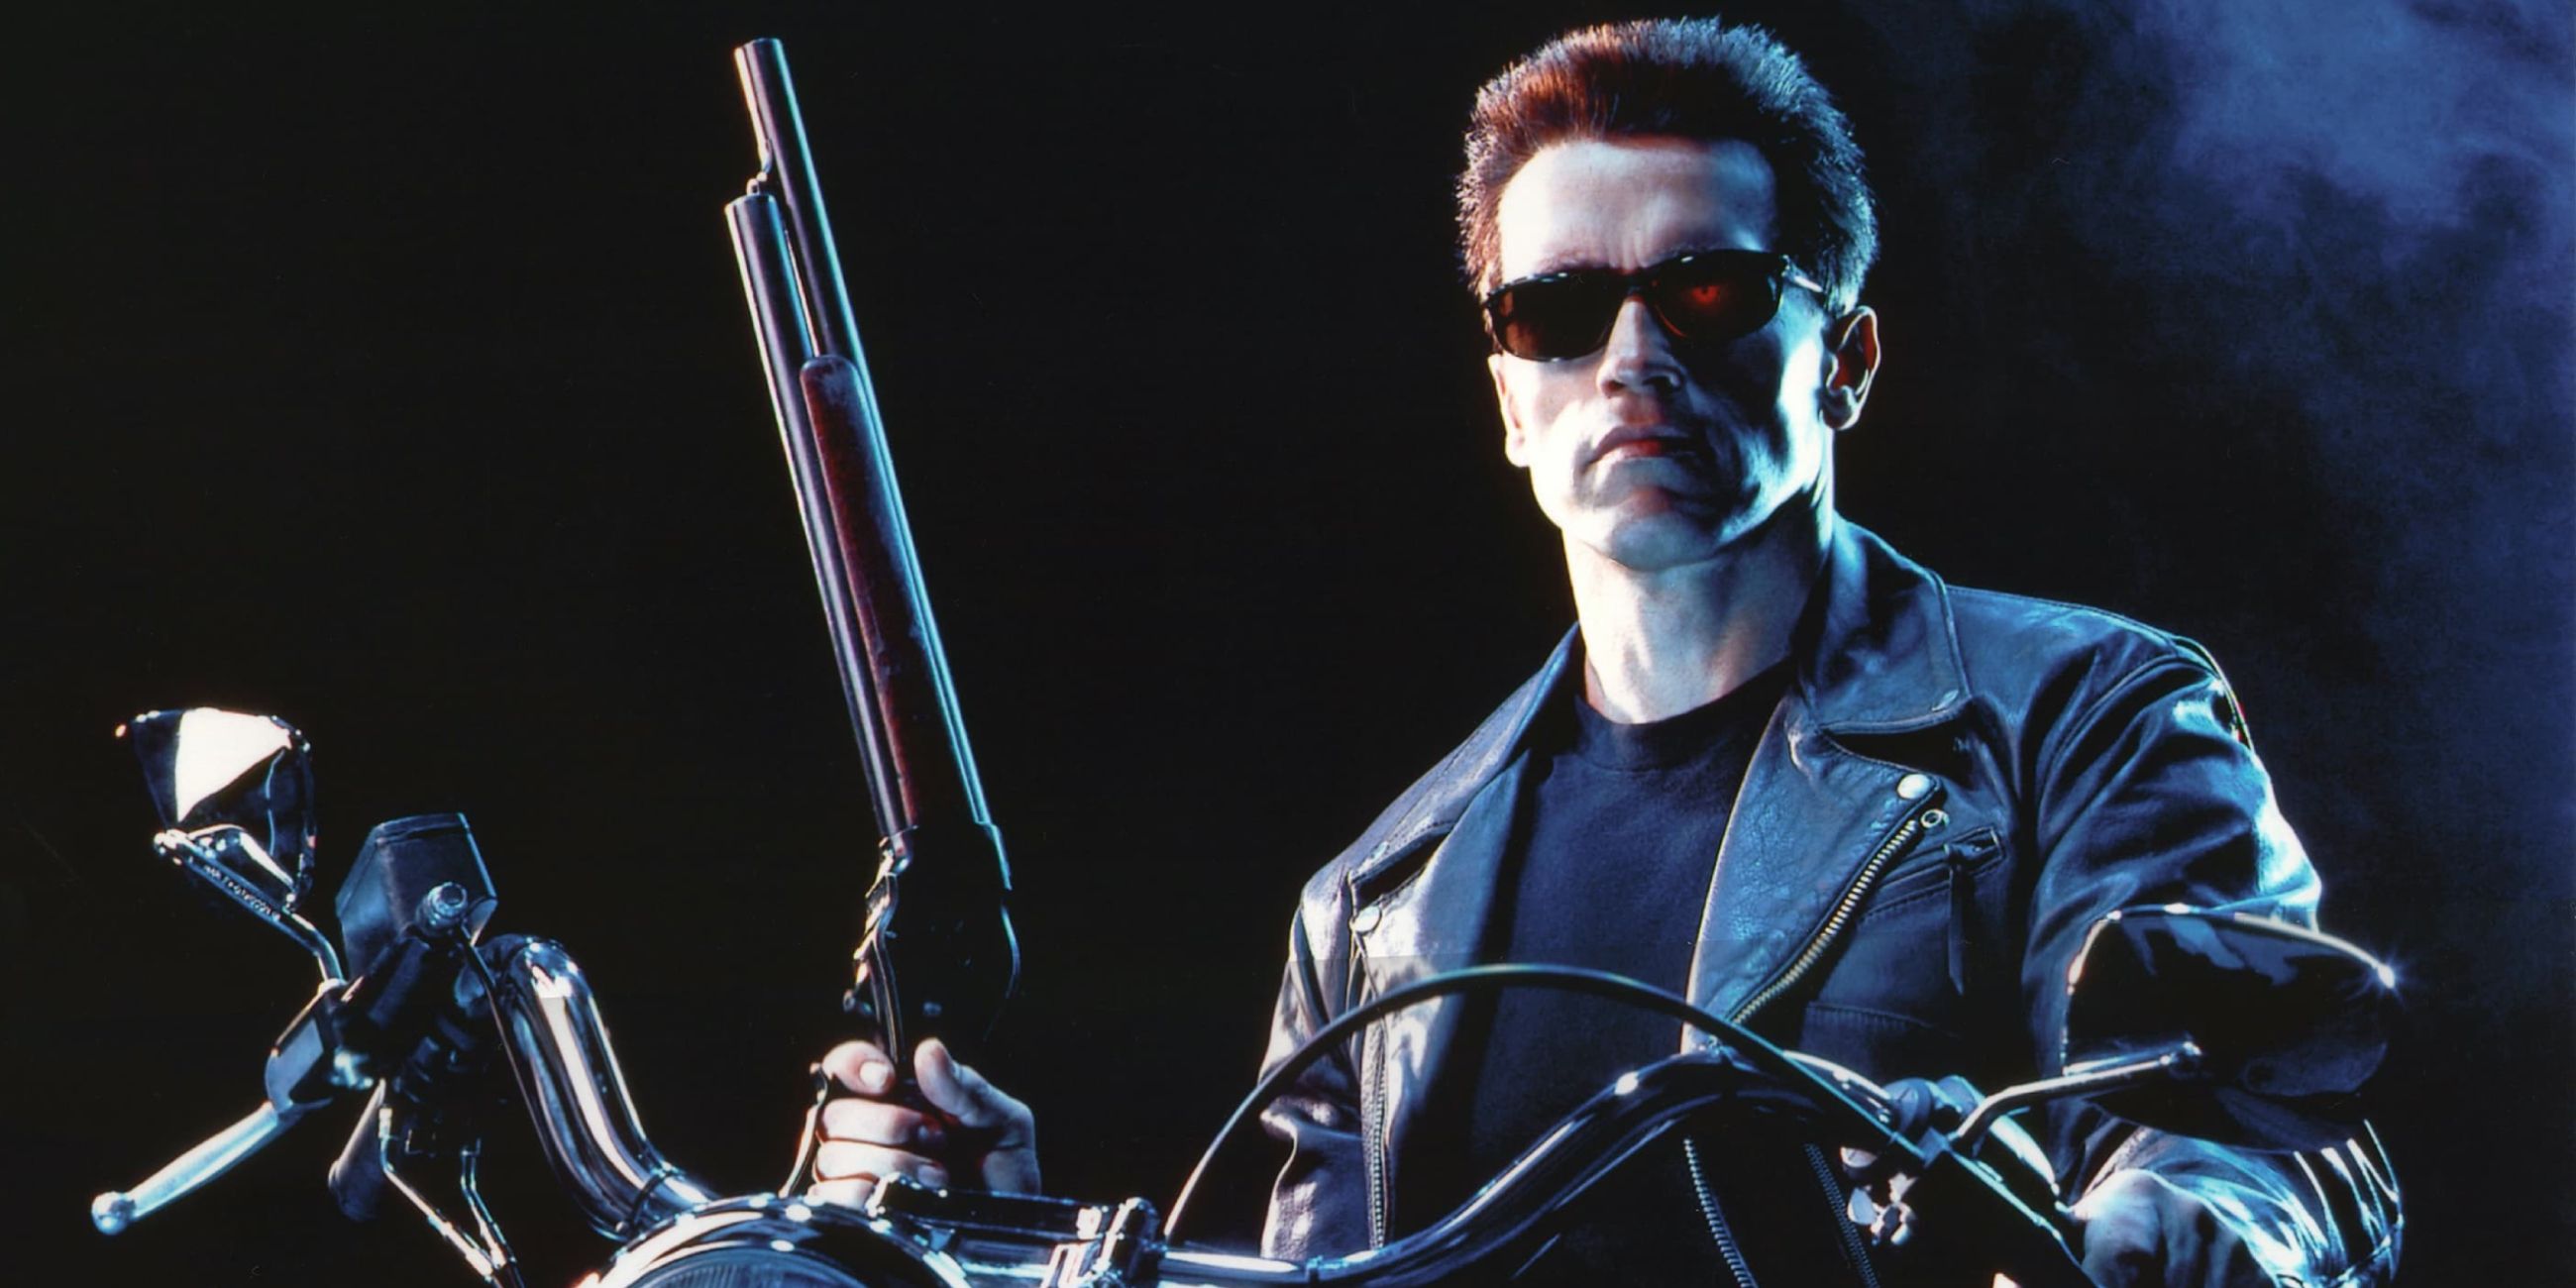 Arnold Schwarzenegger as the Terminator in a poster for Terminator 2: Judgment Day